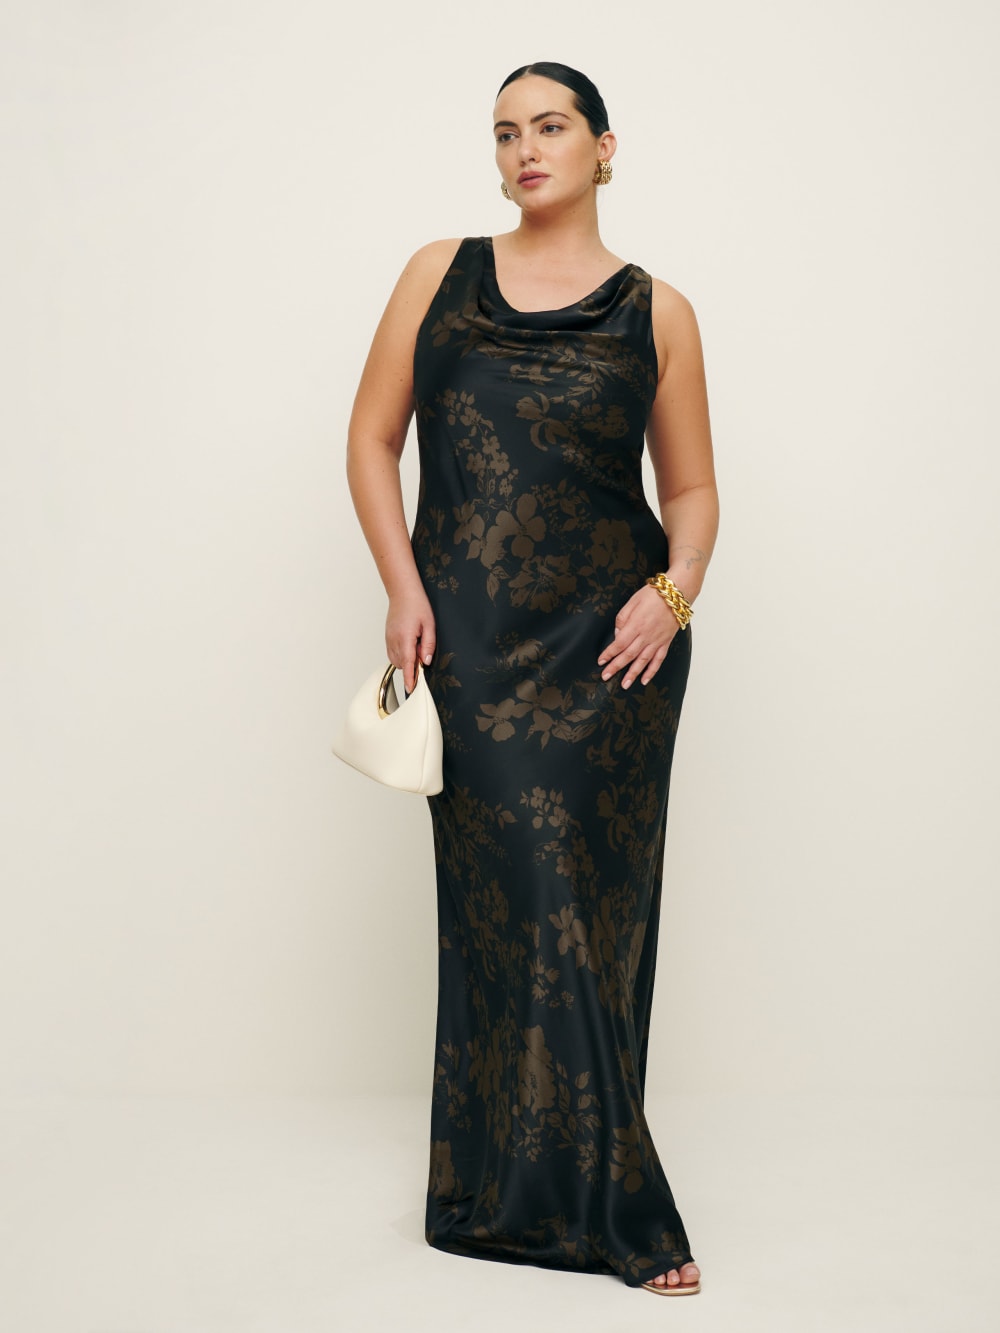 Reformation Annabelle Silk maxi Dress Es dress in black and brown floral with cowl neck and fitted silhouette. 